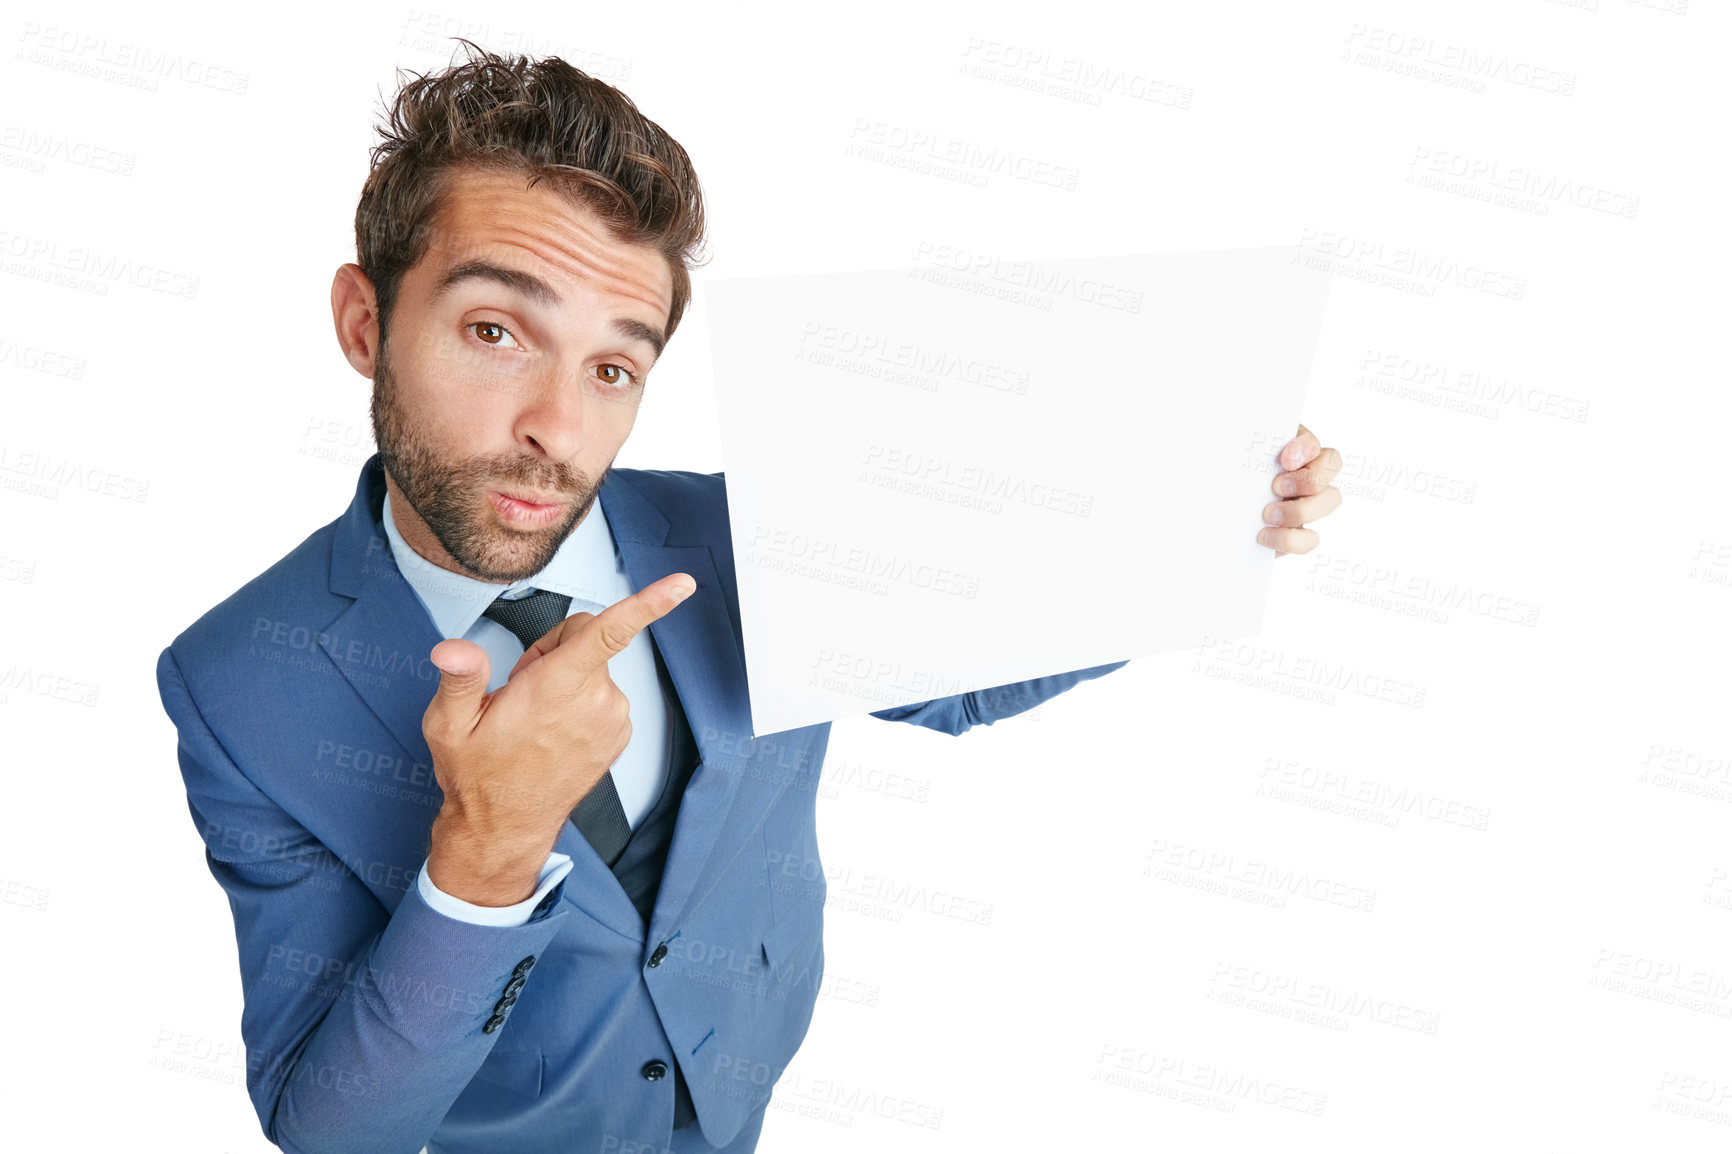 Buy stock photo Studio shot of a handsome businessman holding up a blank placard against a white background